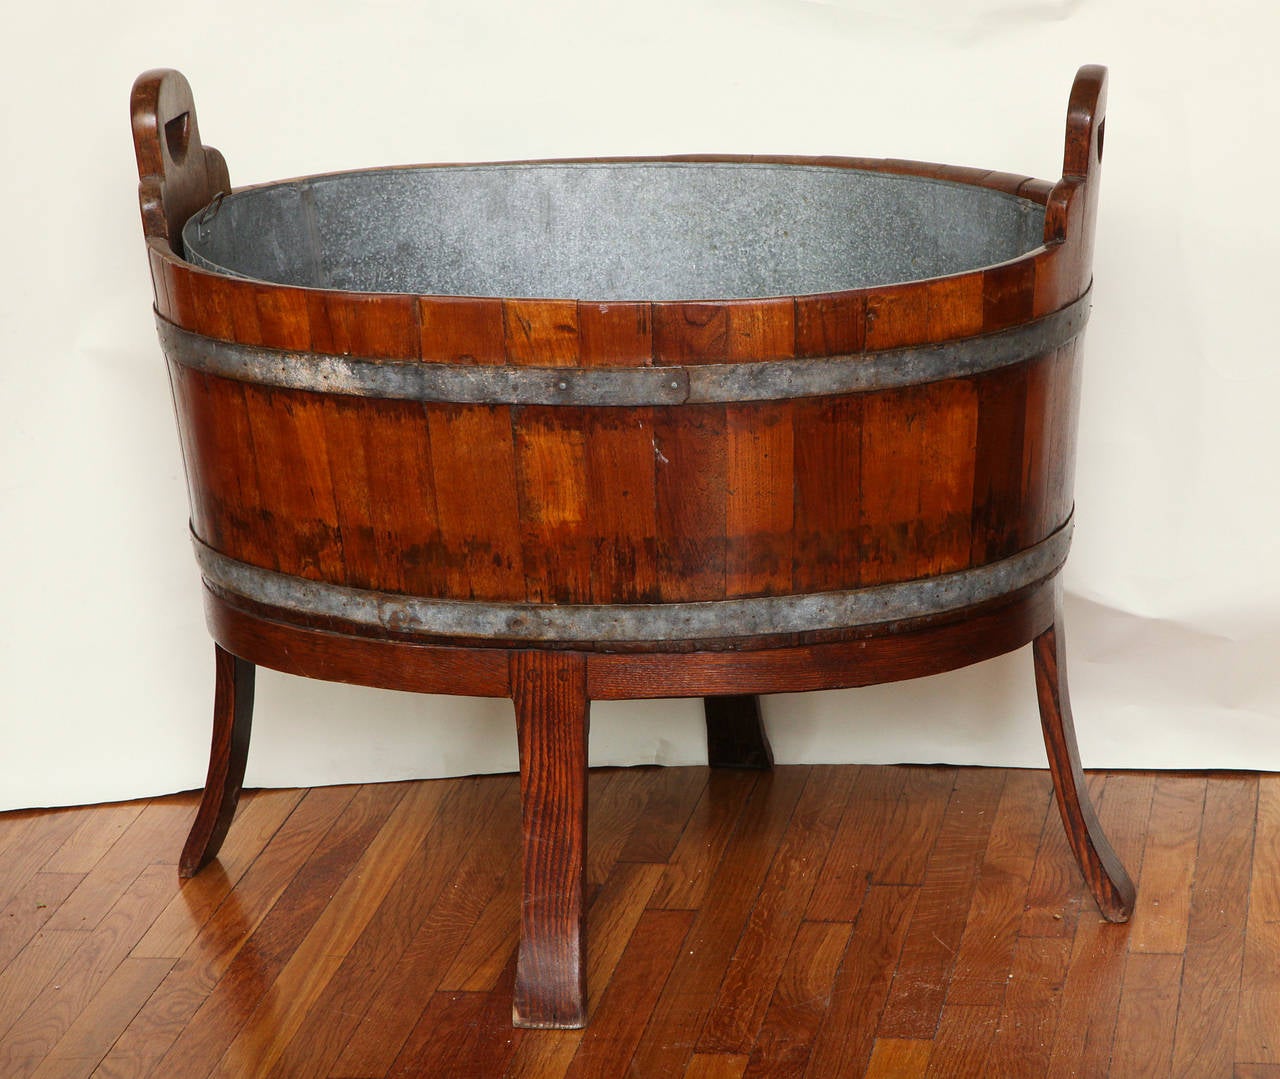 An English oval wine cooler, the oversized barrel constructed wooden body with cut-out handles and zinc liner supported by four splayed legs. Provenance: A Parish Hadley interior designed for Mrs. Charles Englehard.